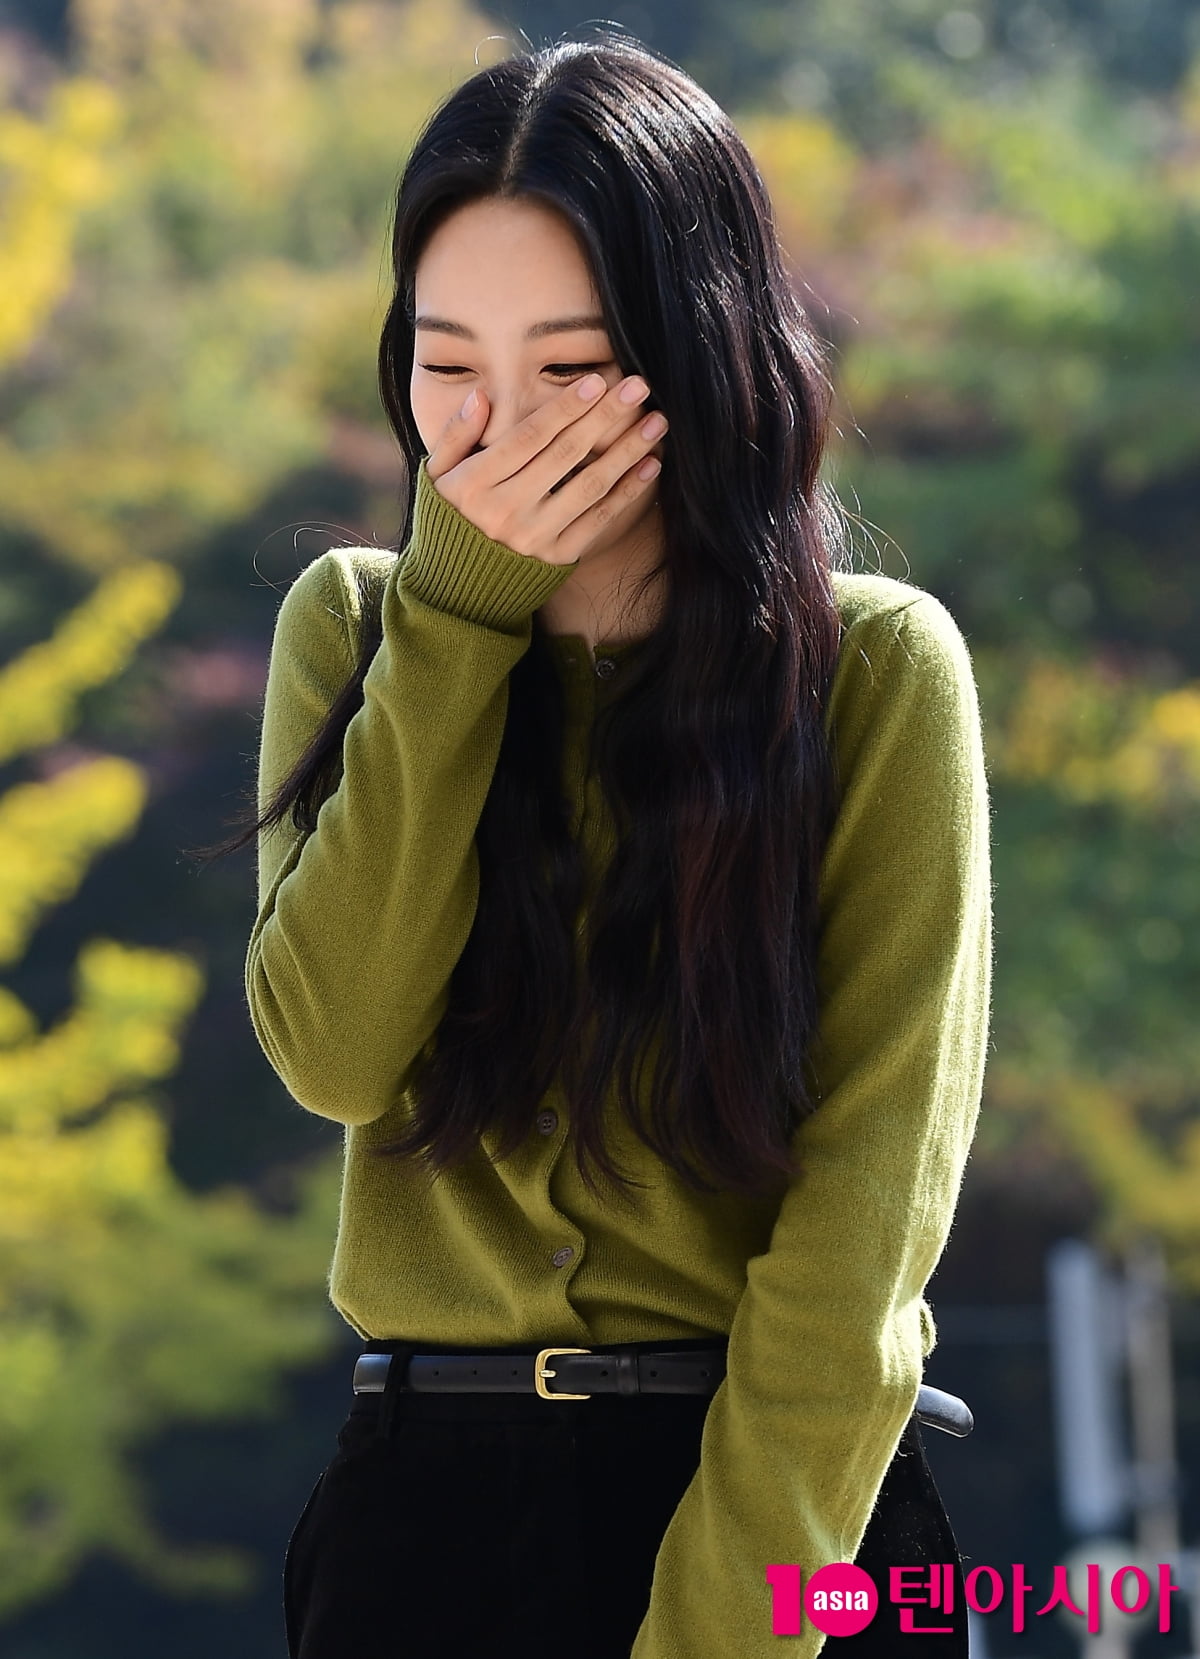 Cho Yi-hyun, a smile that makes even autumn leaves jealous....fresh and lively 